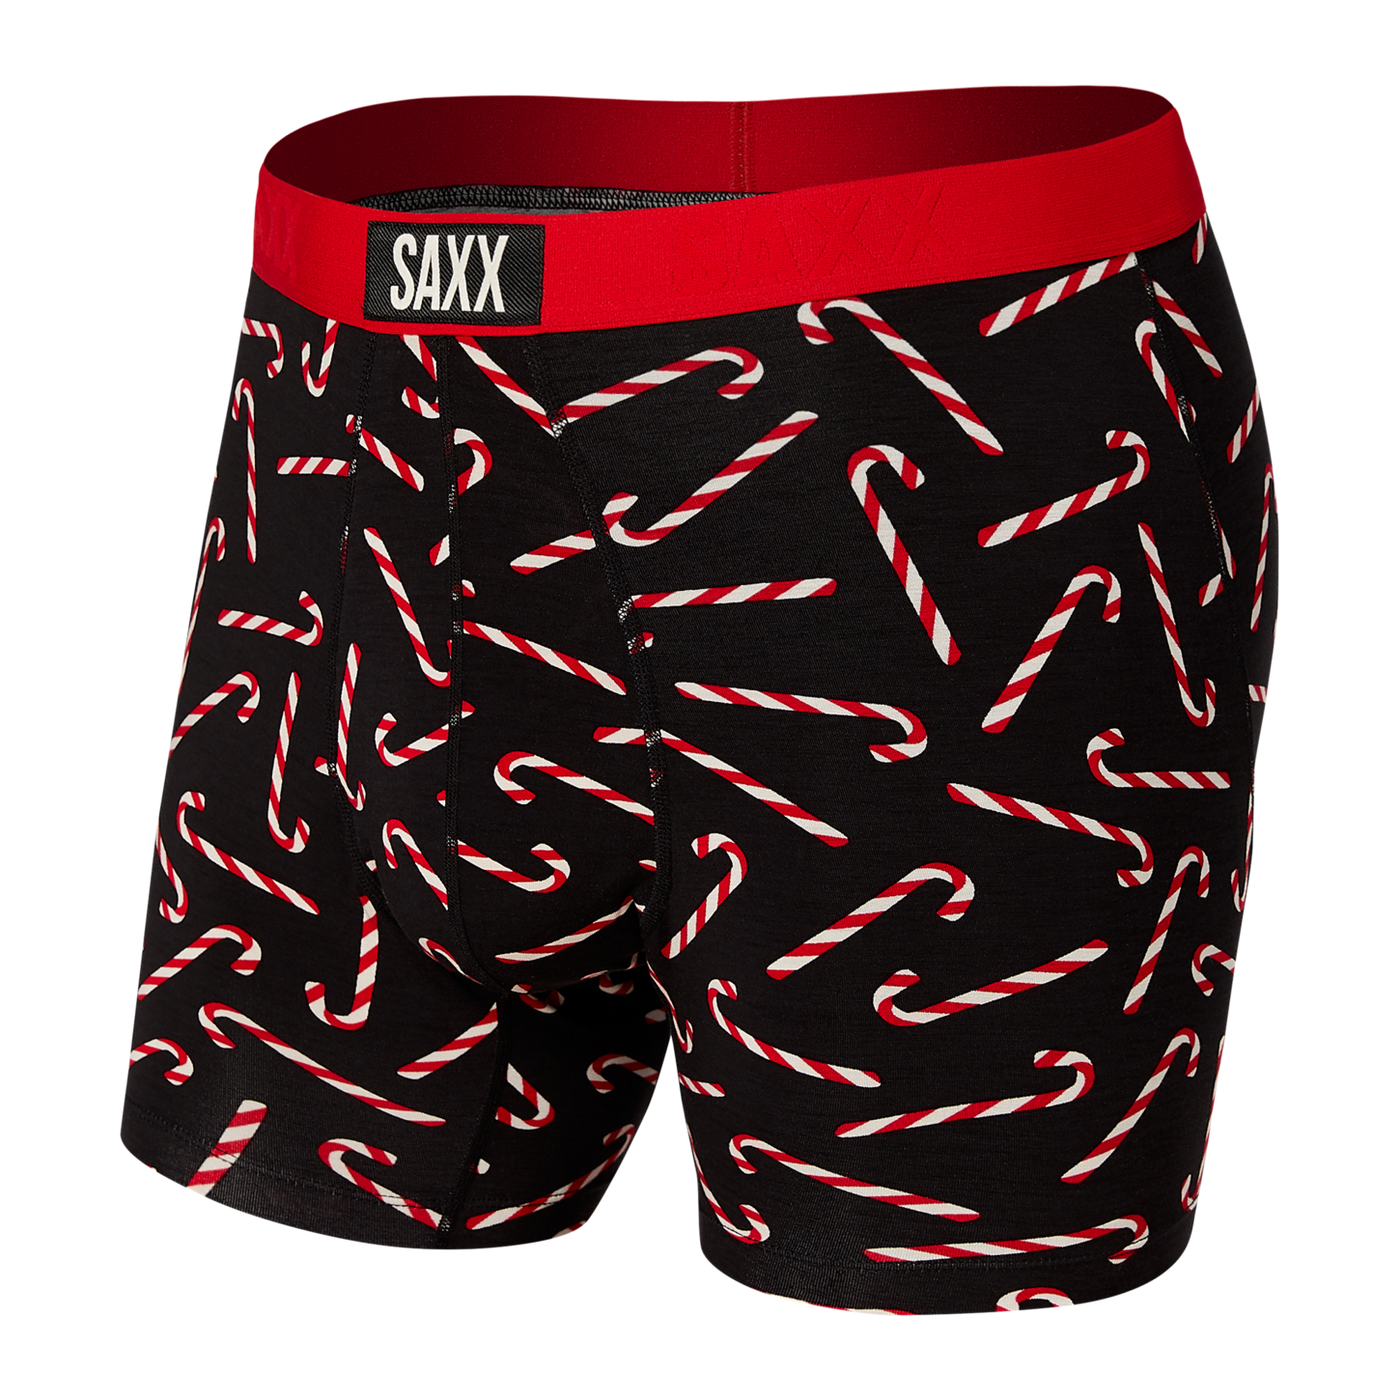 Vibe Super Soft Jersey Boxer Brief - Black Candy Canes